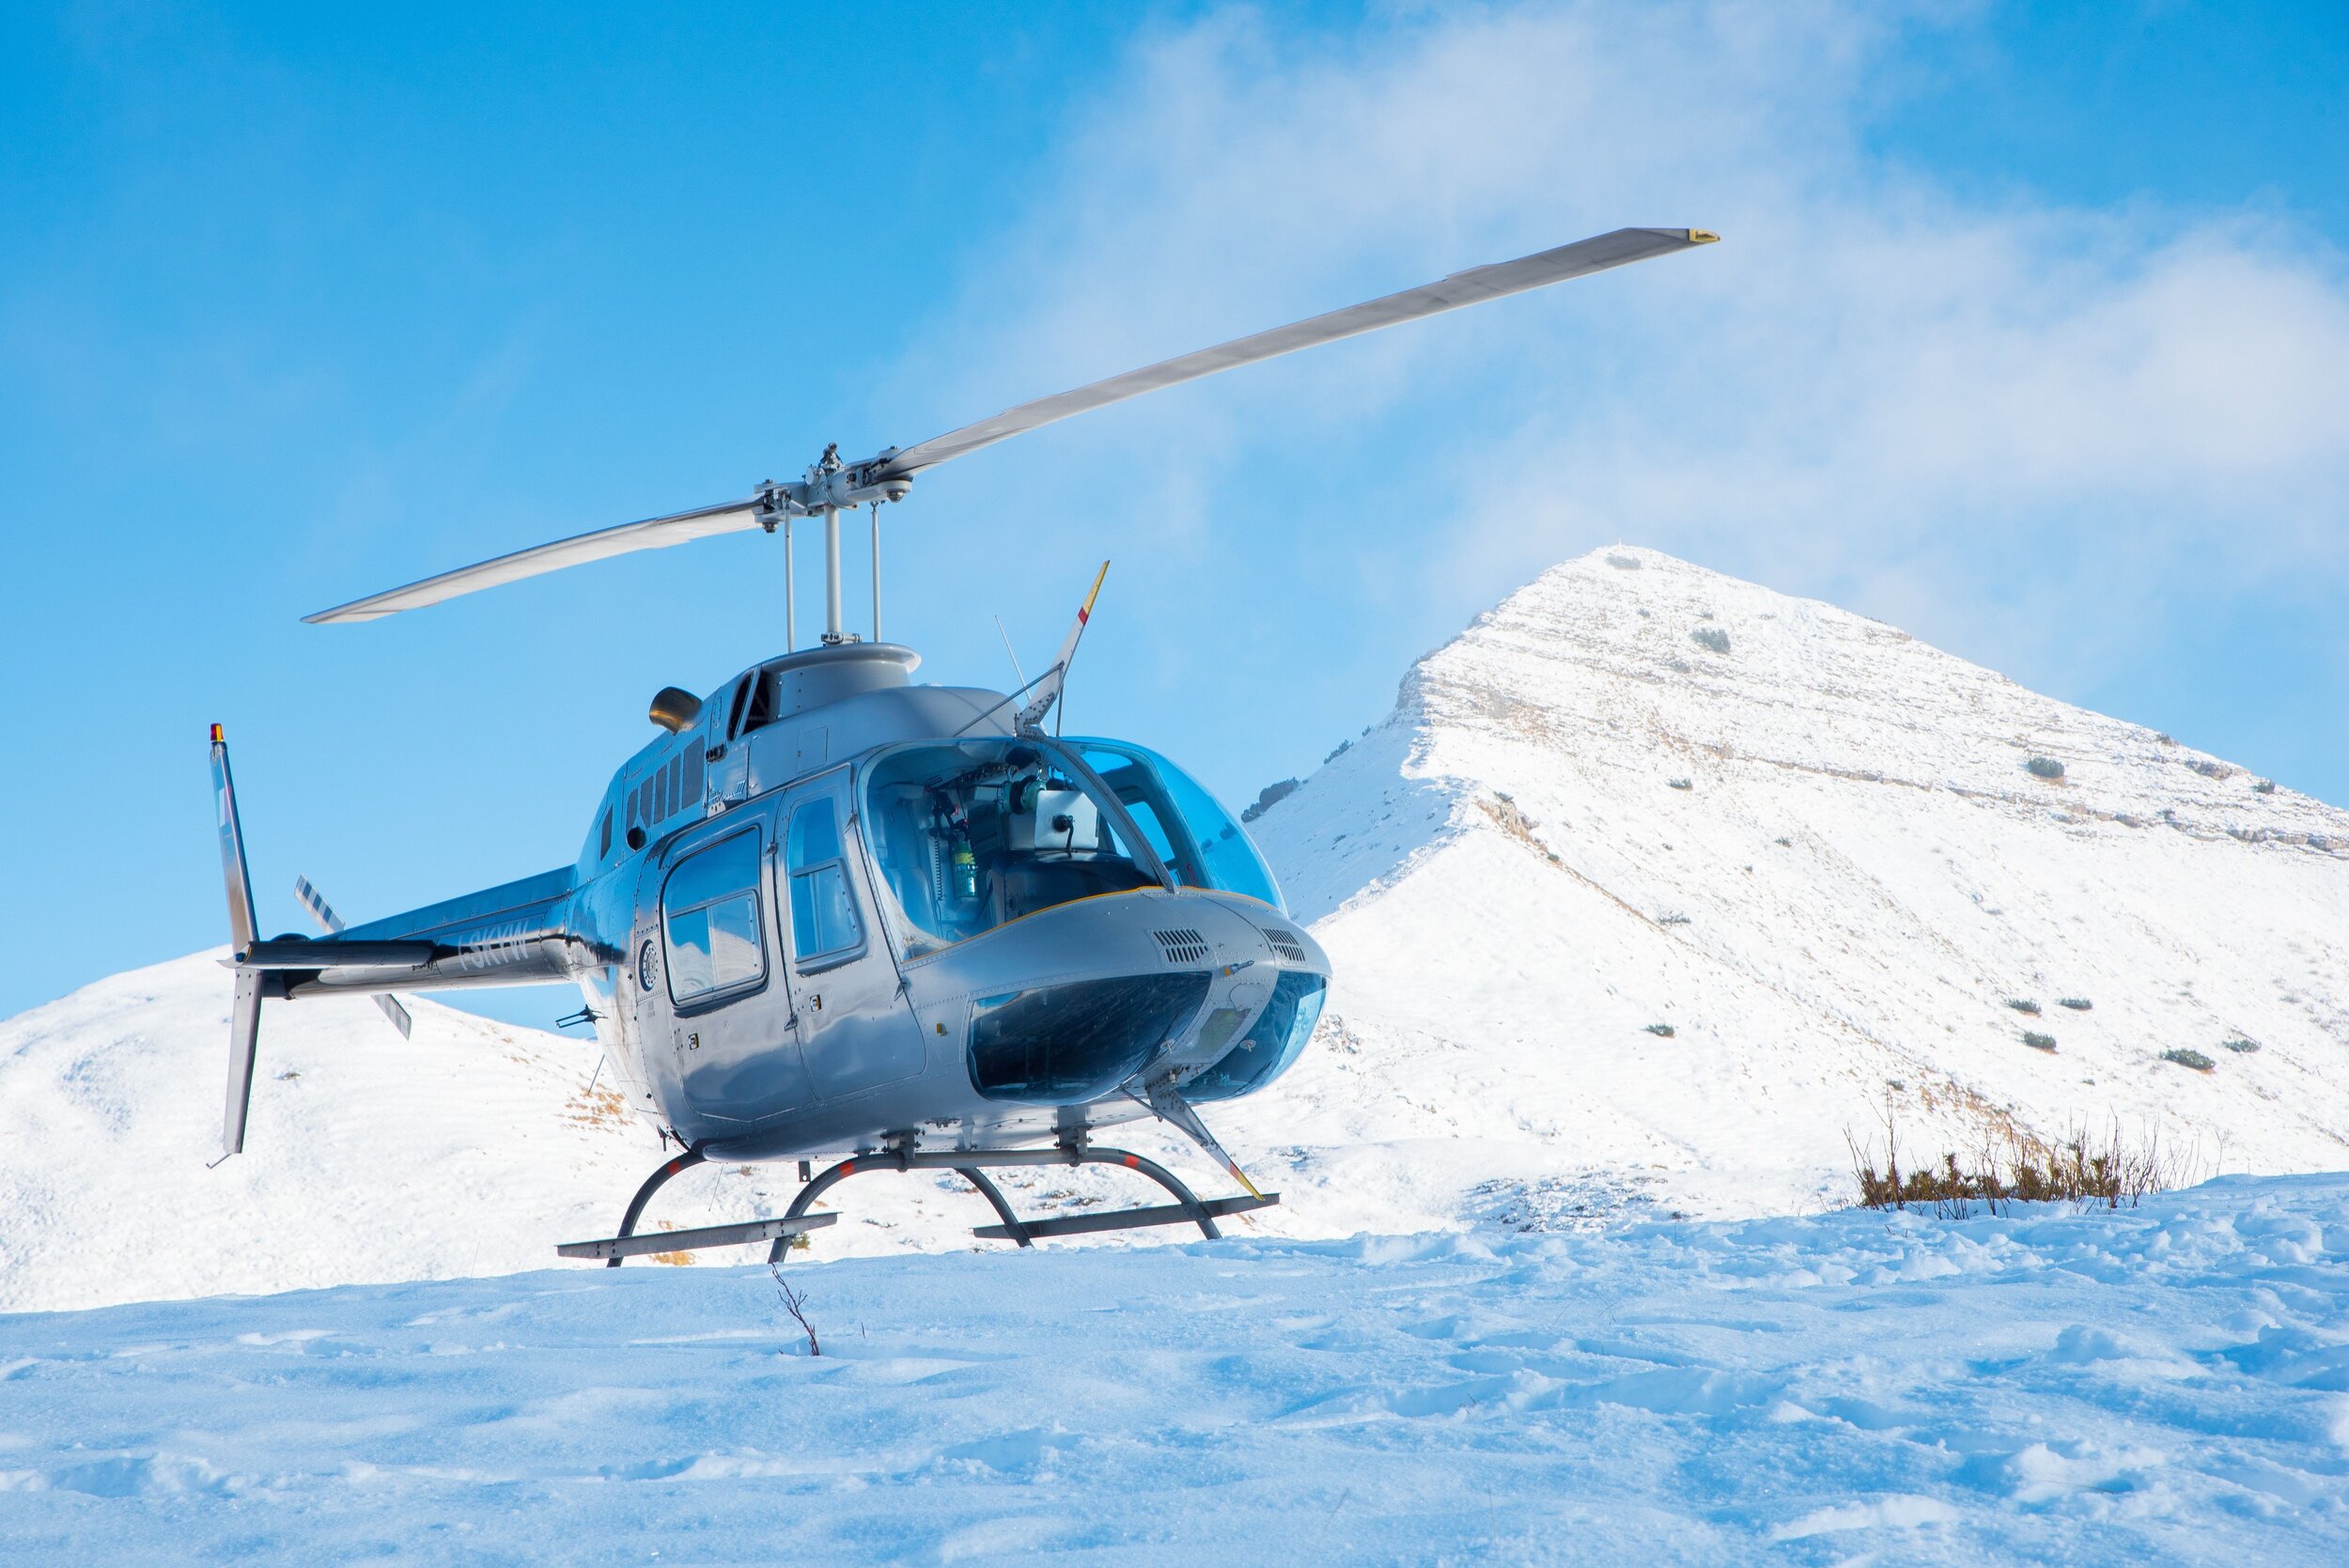 Helicopter ride mountains.jpg